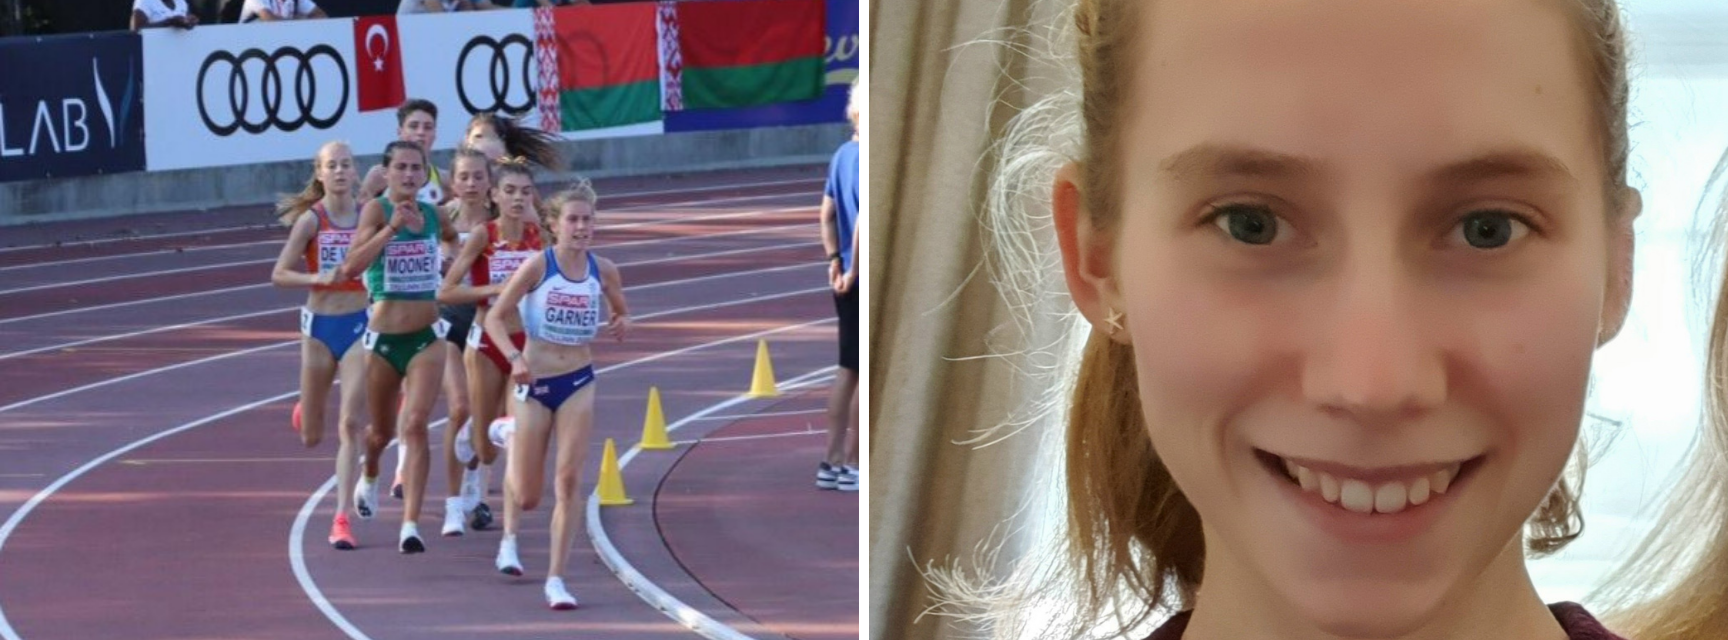 Alice Garner competing in athletics and profile image